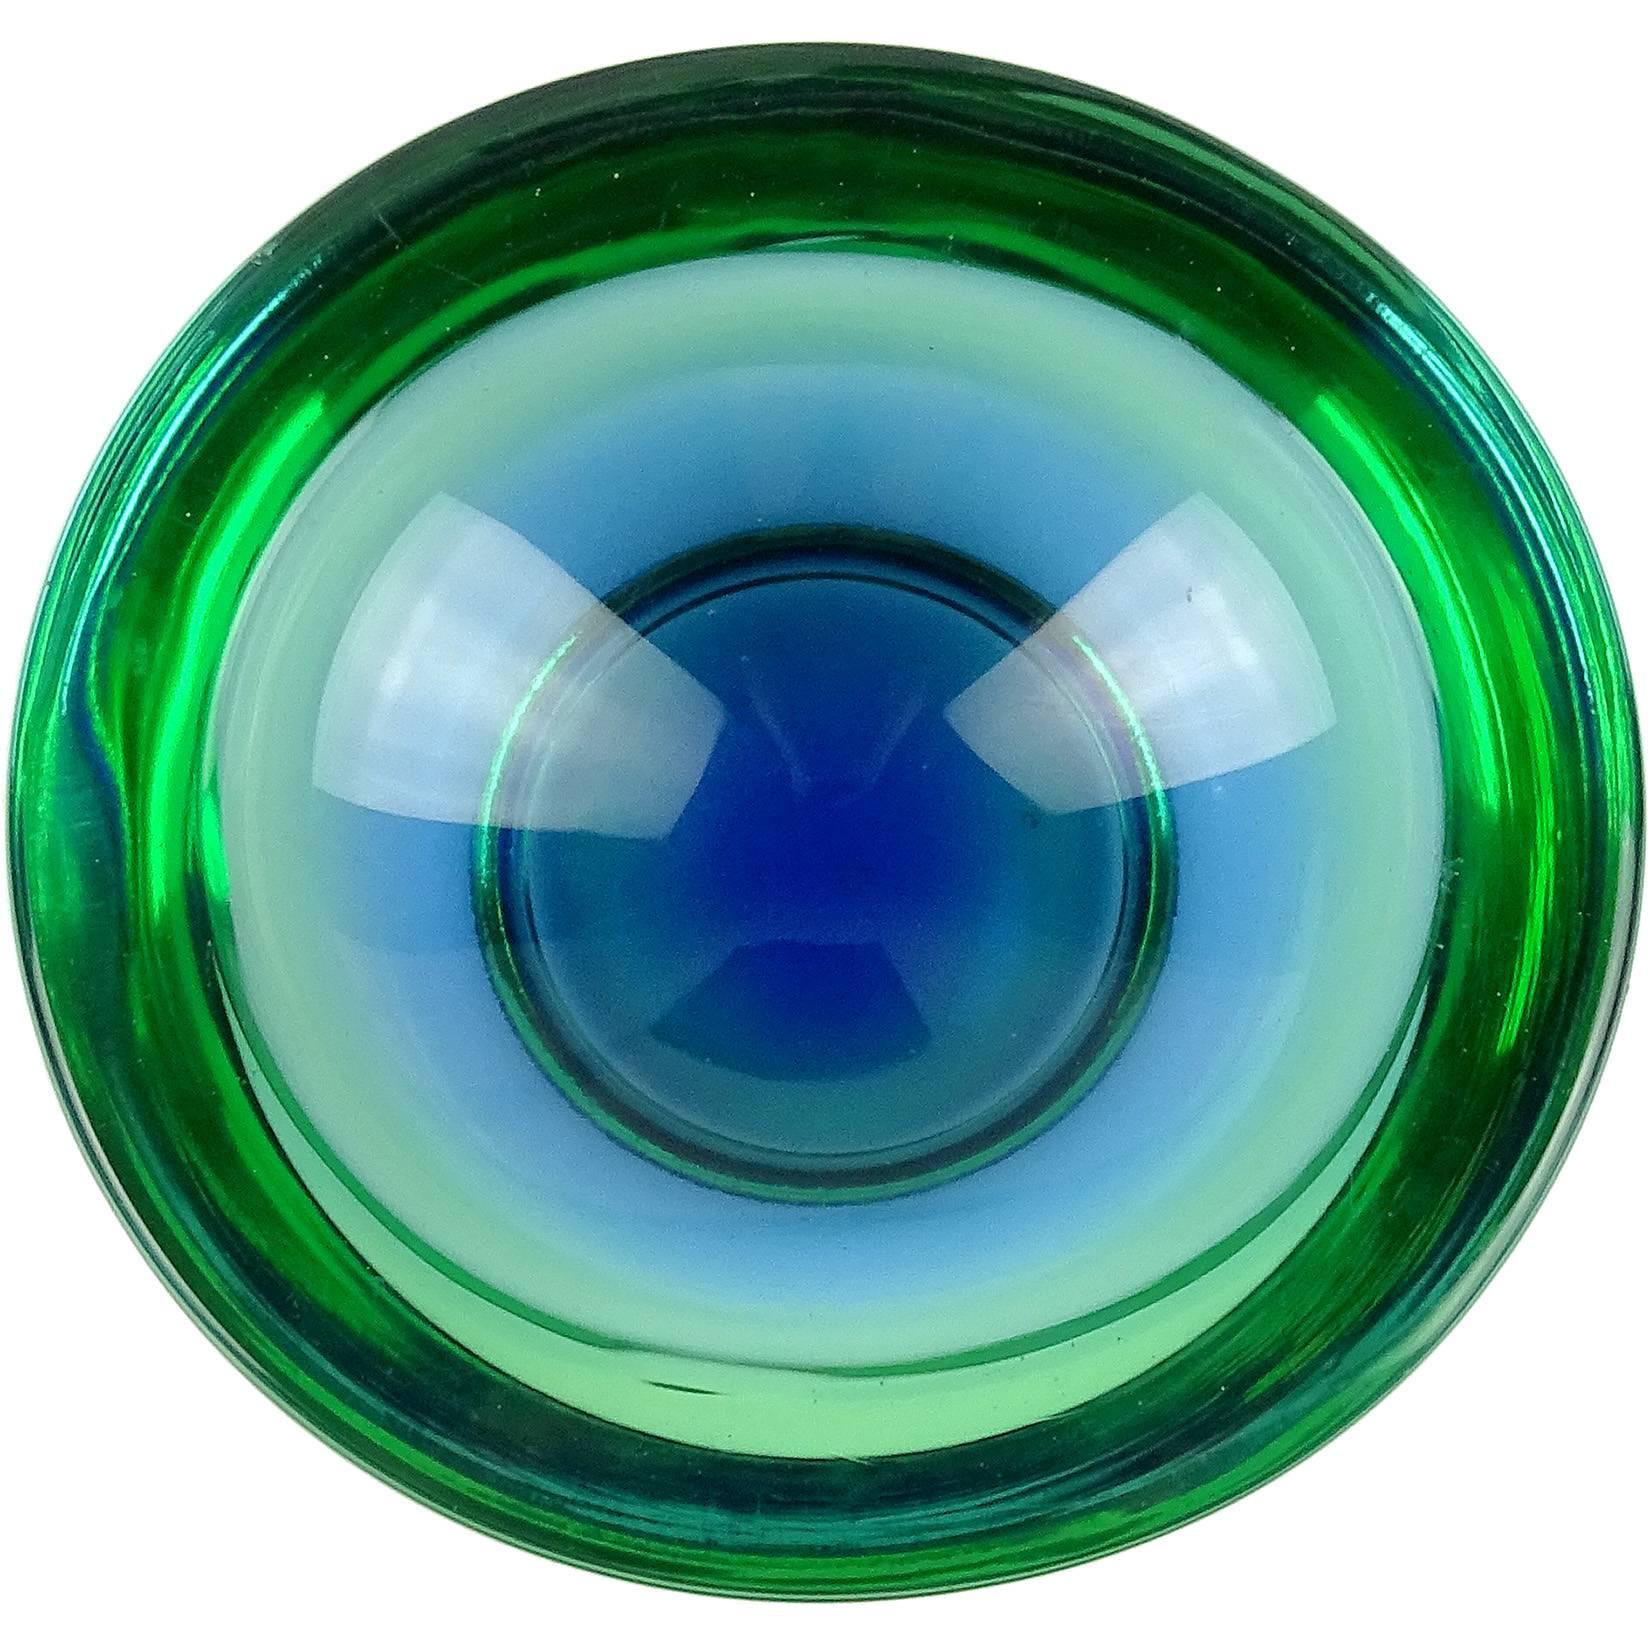 Beautiful Murano handblown Sommerso blue and green Italian art glass bowl. Documented to designer Flavio Poli, for the Seguso Vetri d'Arte company. The piece is very thick and heavy, raised by a sculpted foot, and flat cut rim. Measures: 6 1/2’ x 6